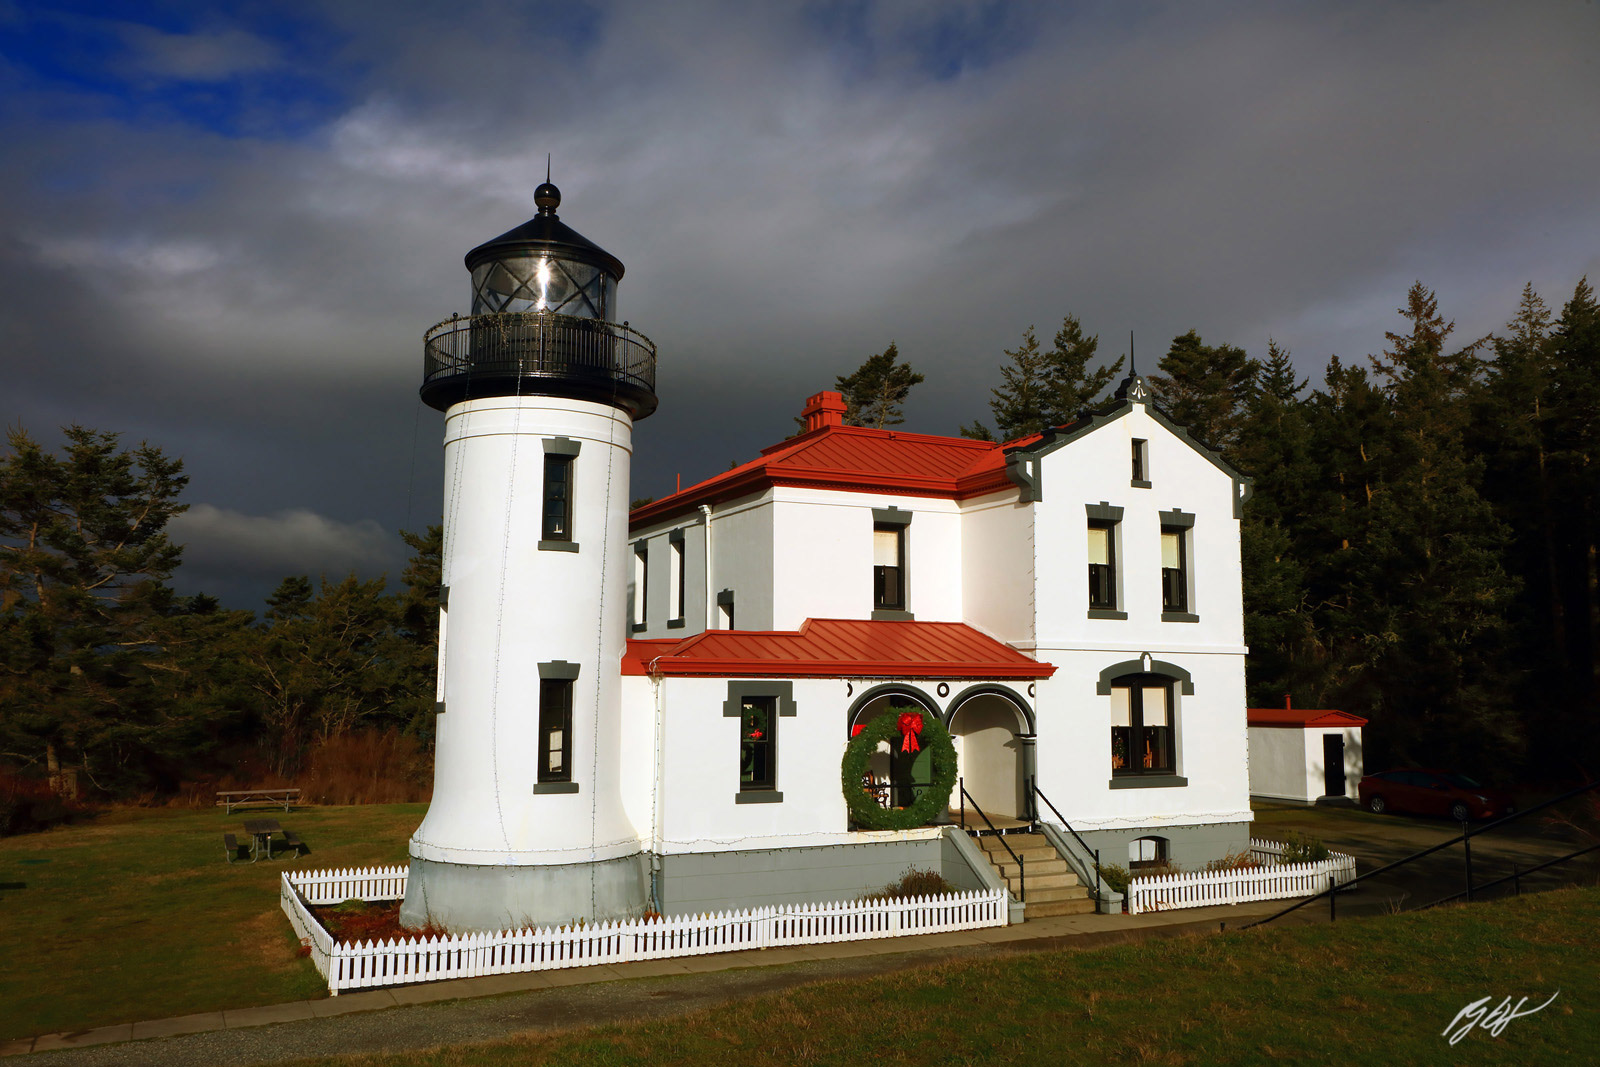 Admiralty Head Lighthouse Decorated for the Holidays, in Fort Casey State Park in Washington